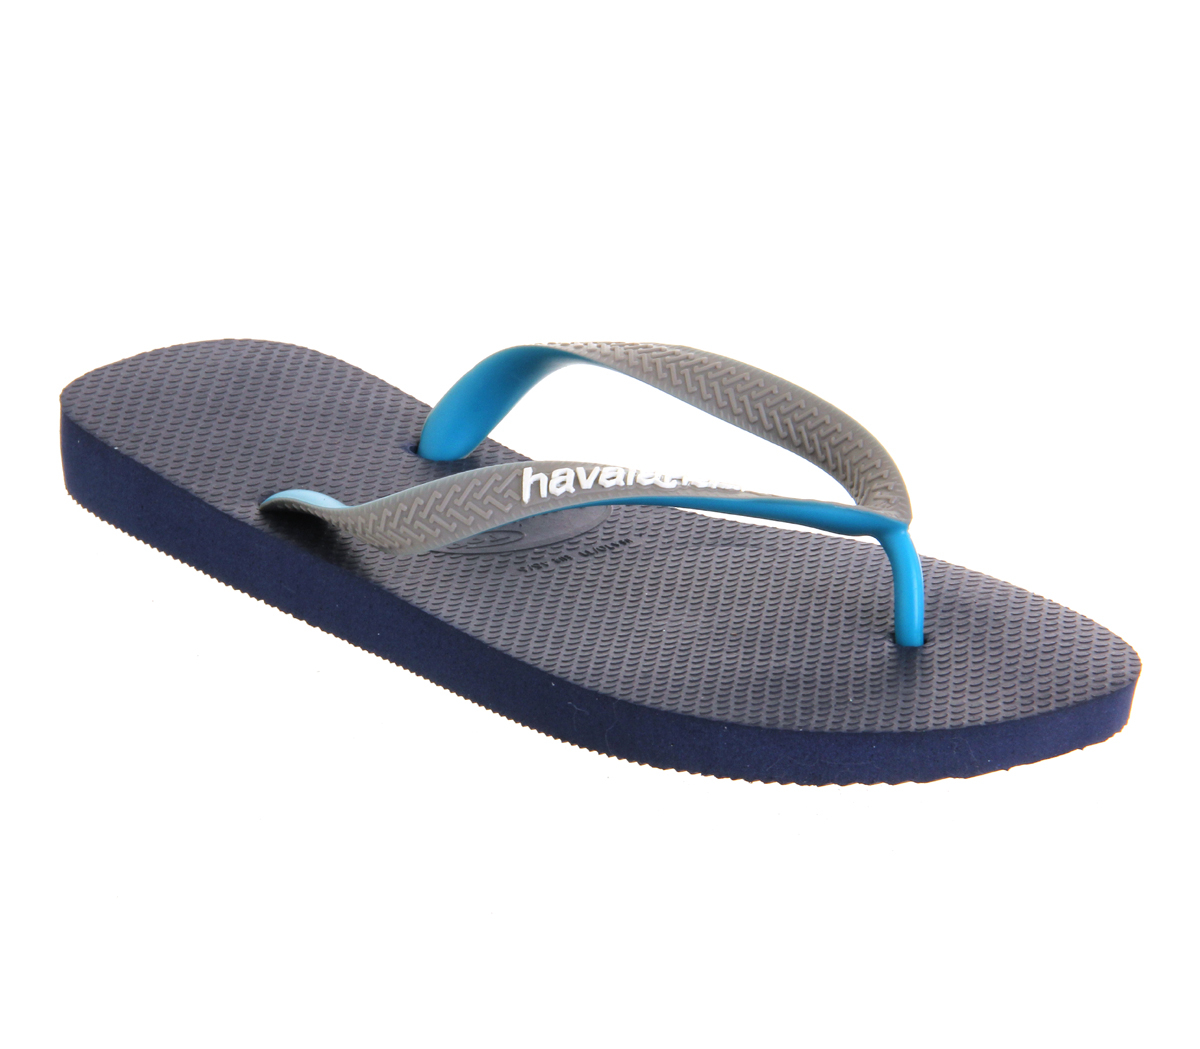 Lyst - Havaianas Top Mix in Blue for Men